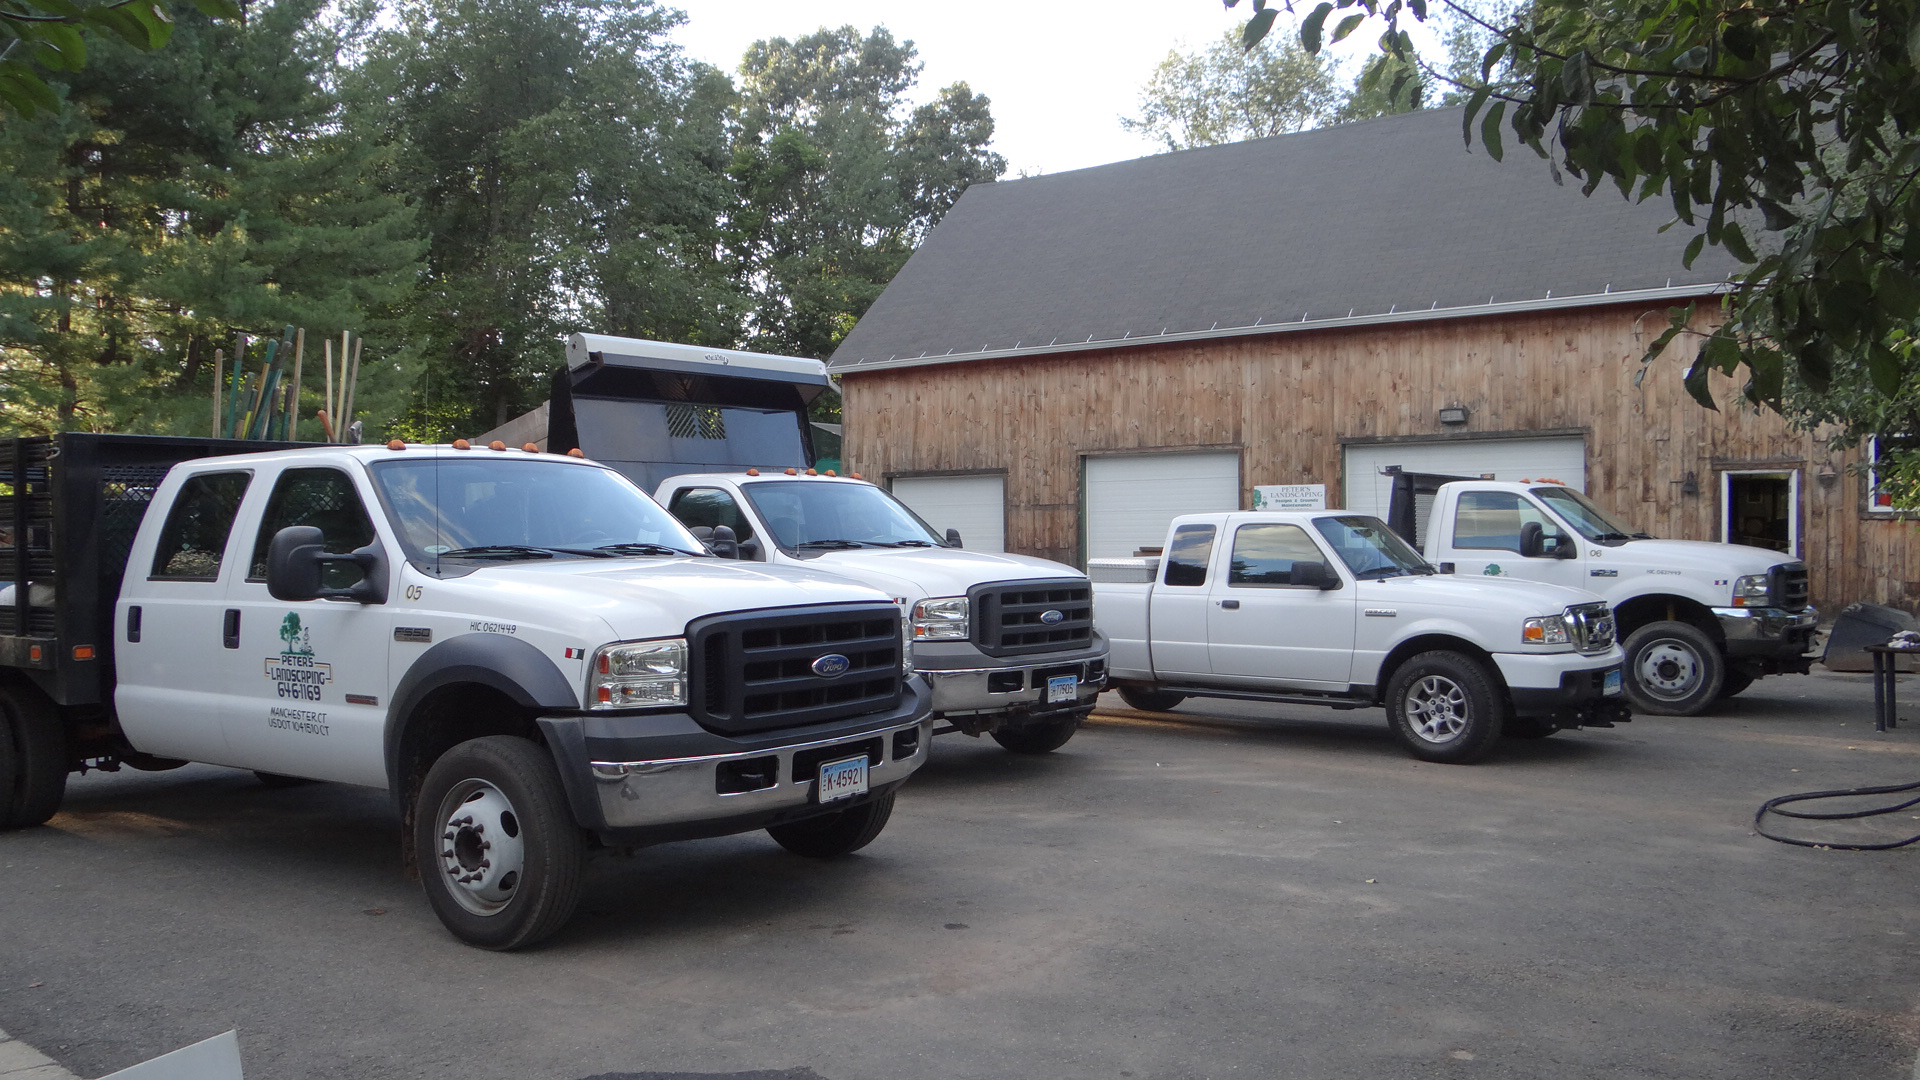 At Peter's Landscaping we have the crew and the fleet to help you meet your landscaping design and maintenance needs.